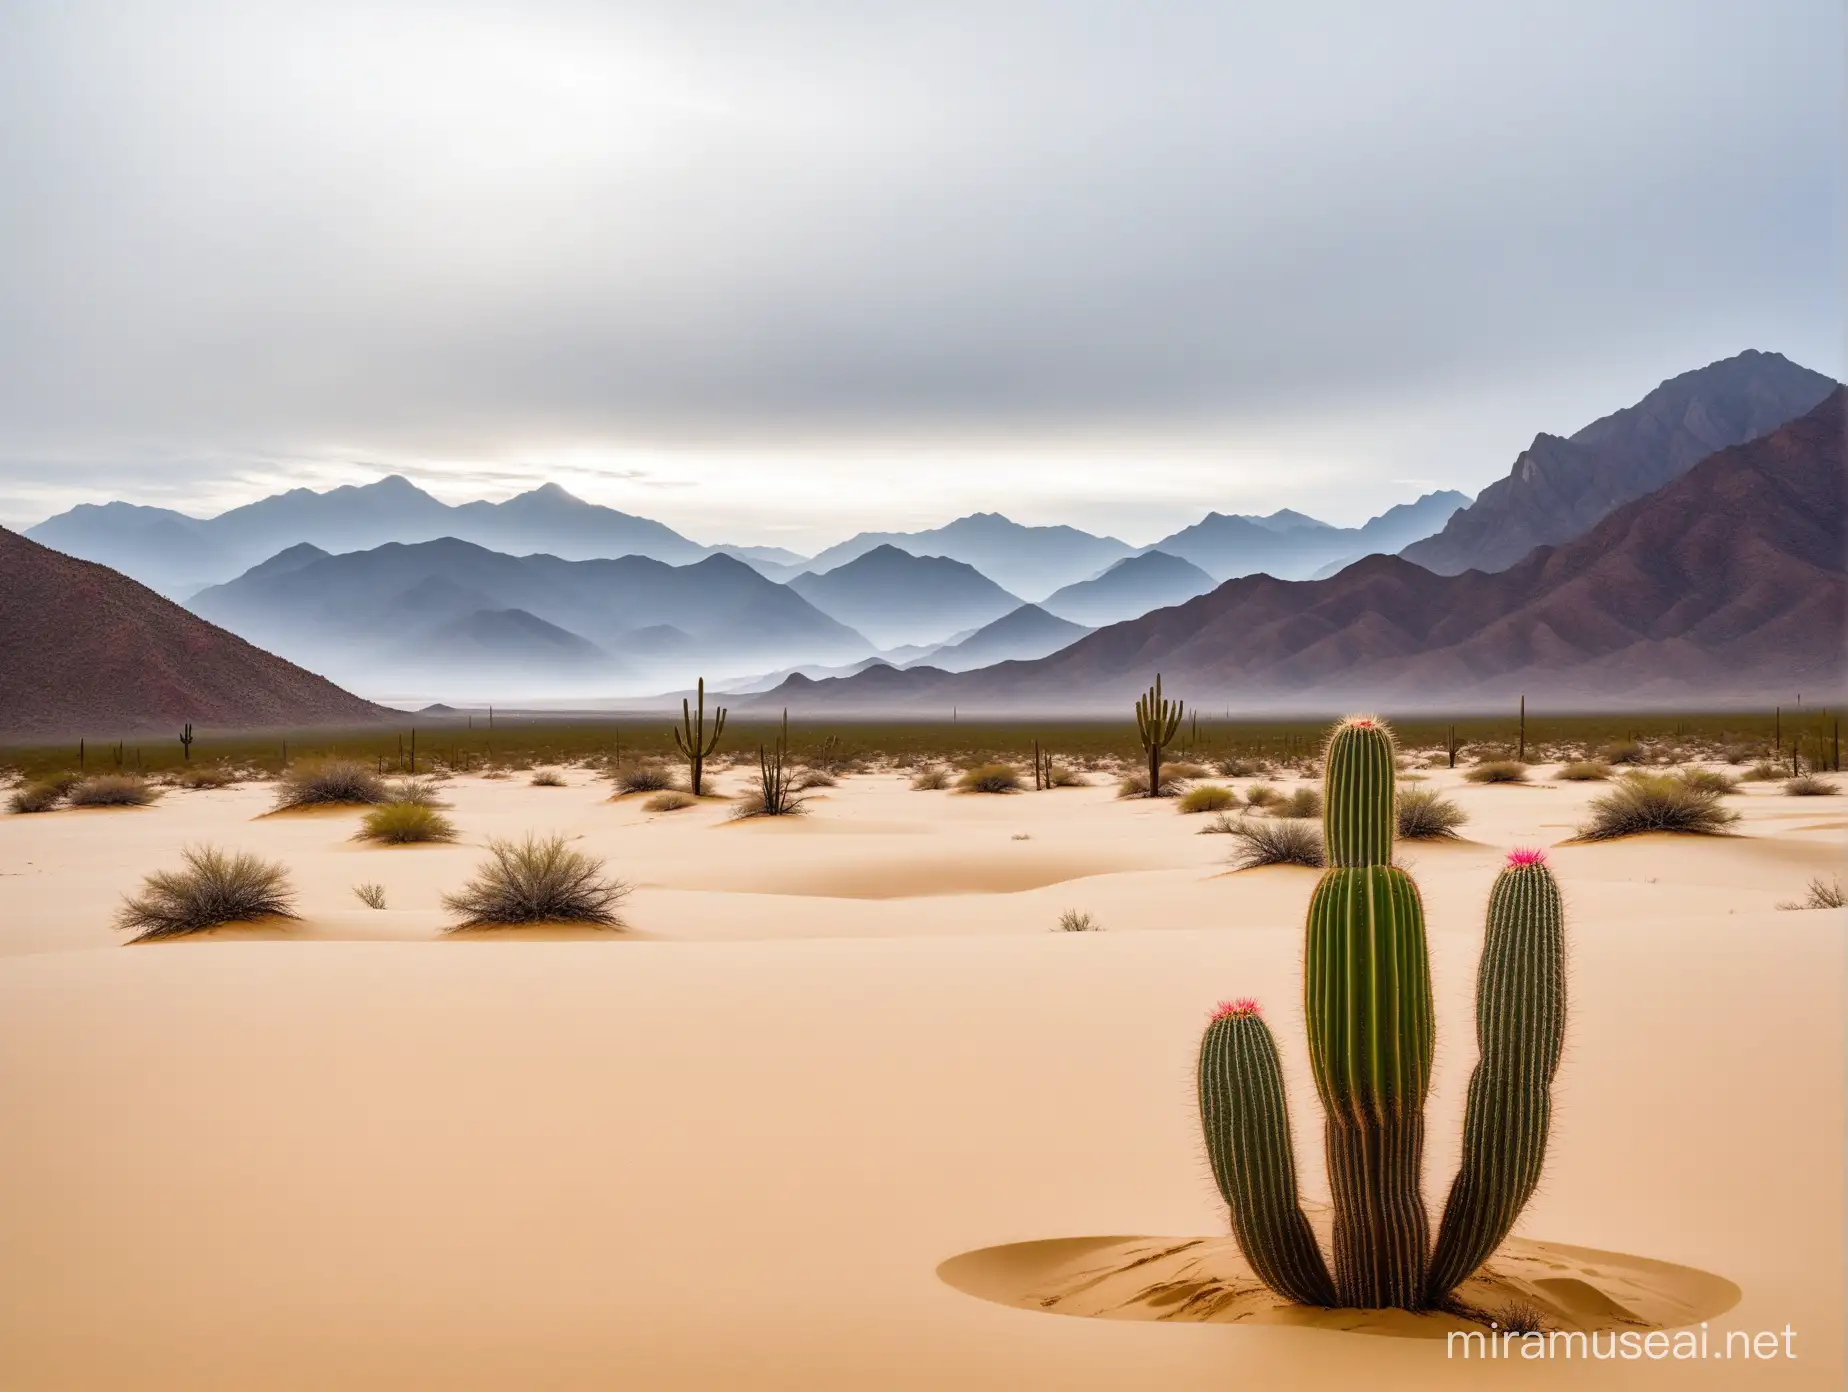 Desert Cactus Landscape with Misty Mountains